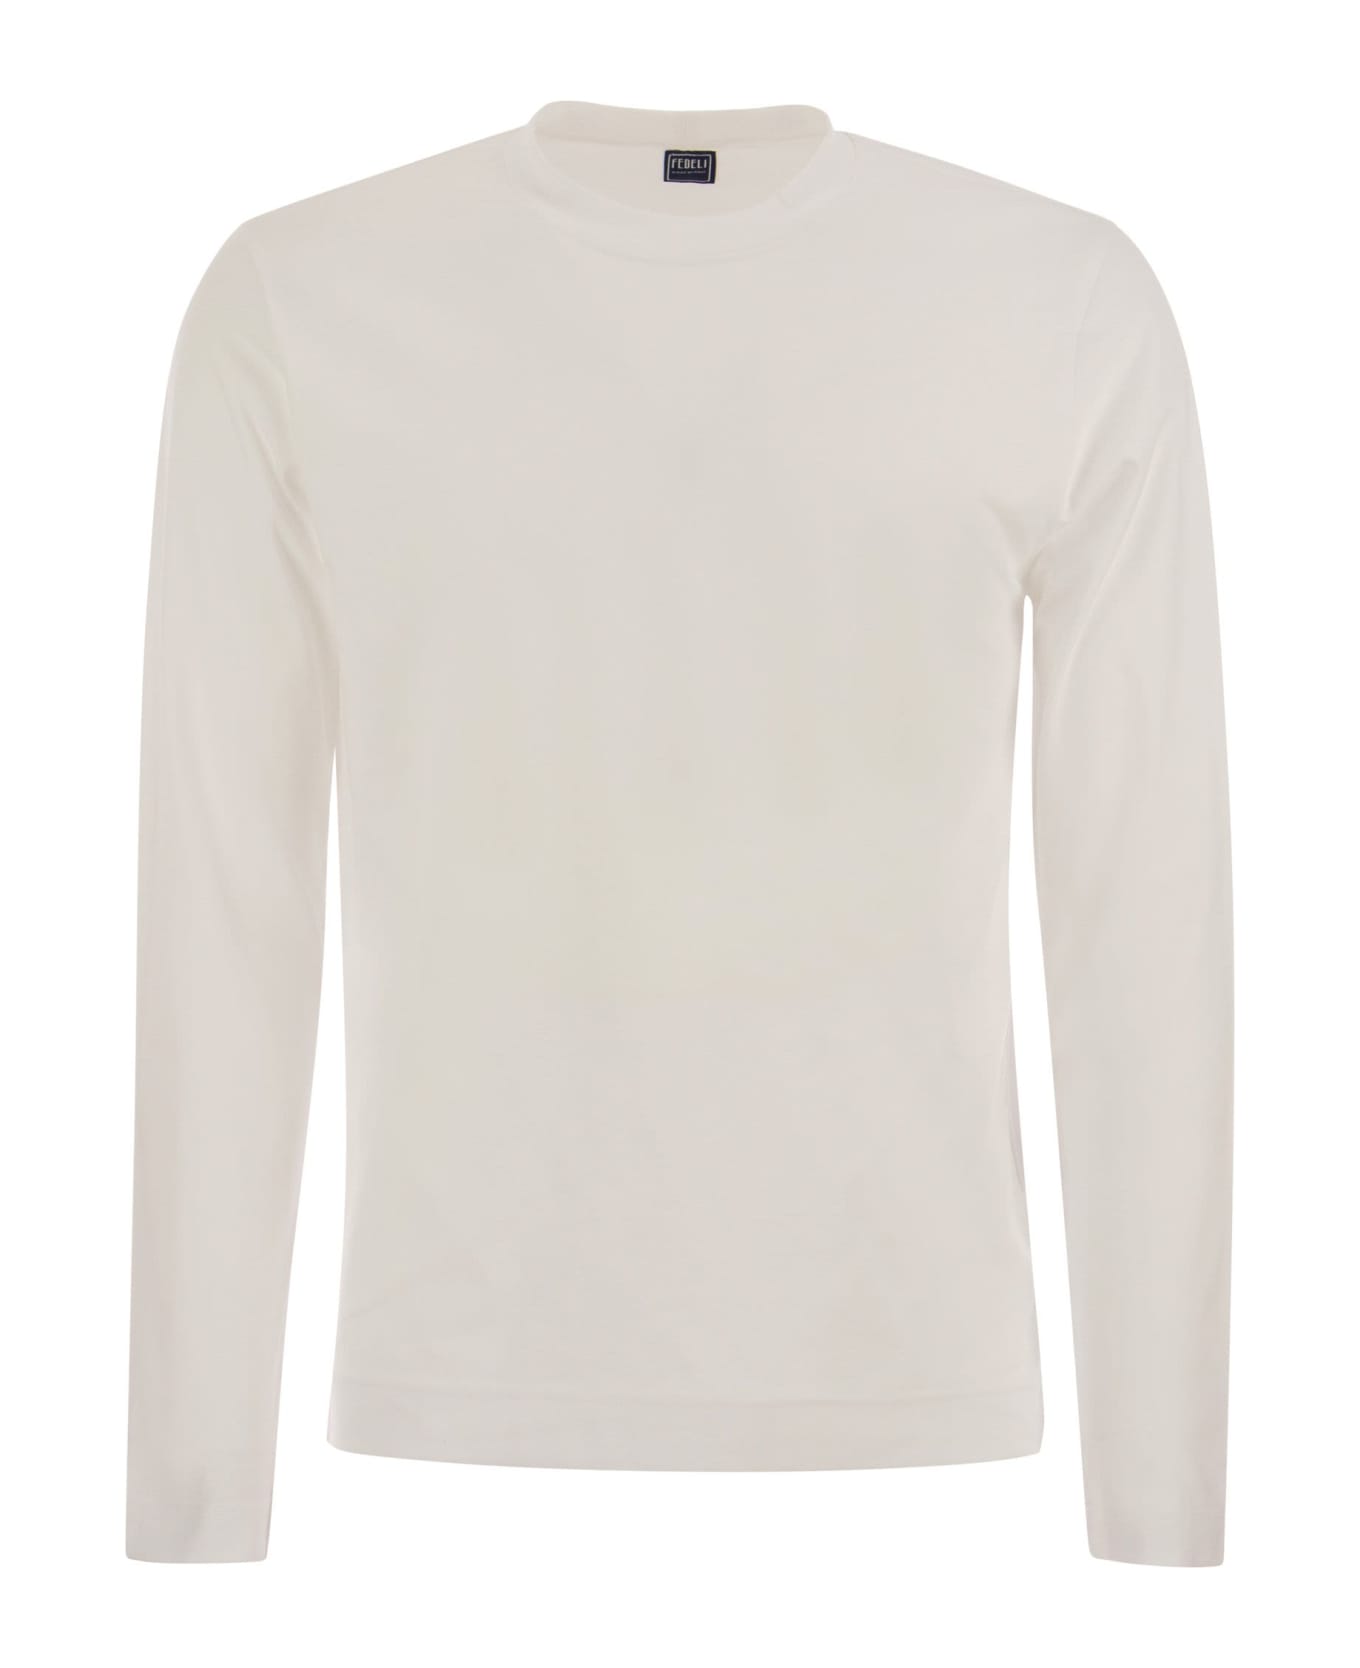 Fedeli Extreme - Crew-neck T-shirt With Long Sleeves - Cream